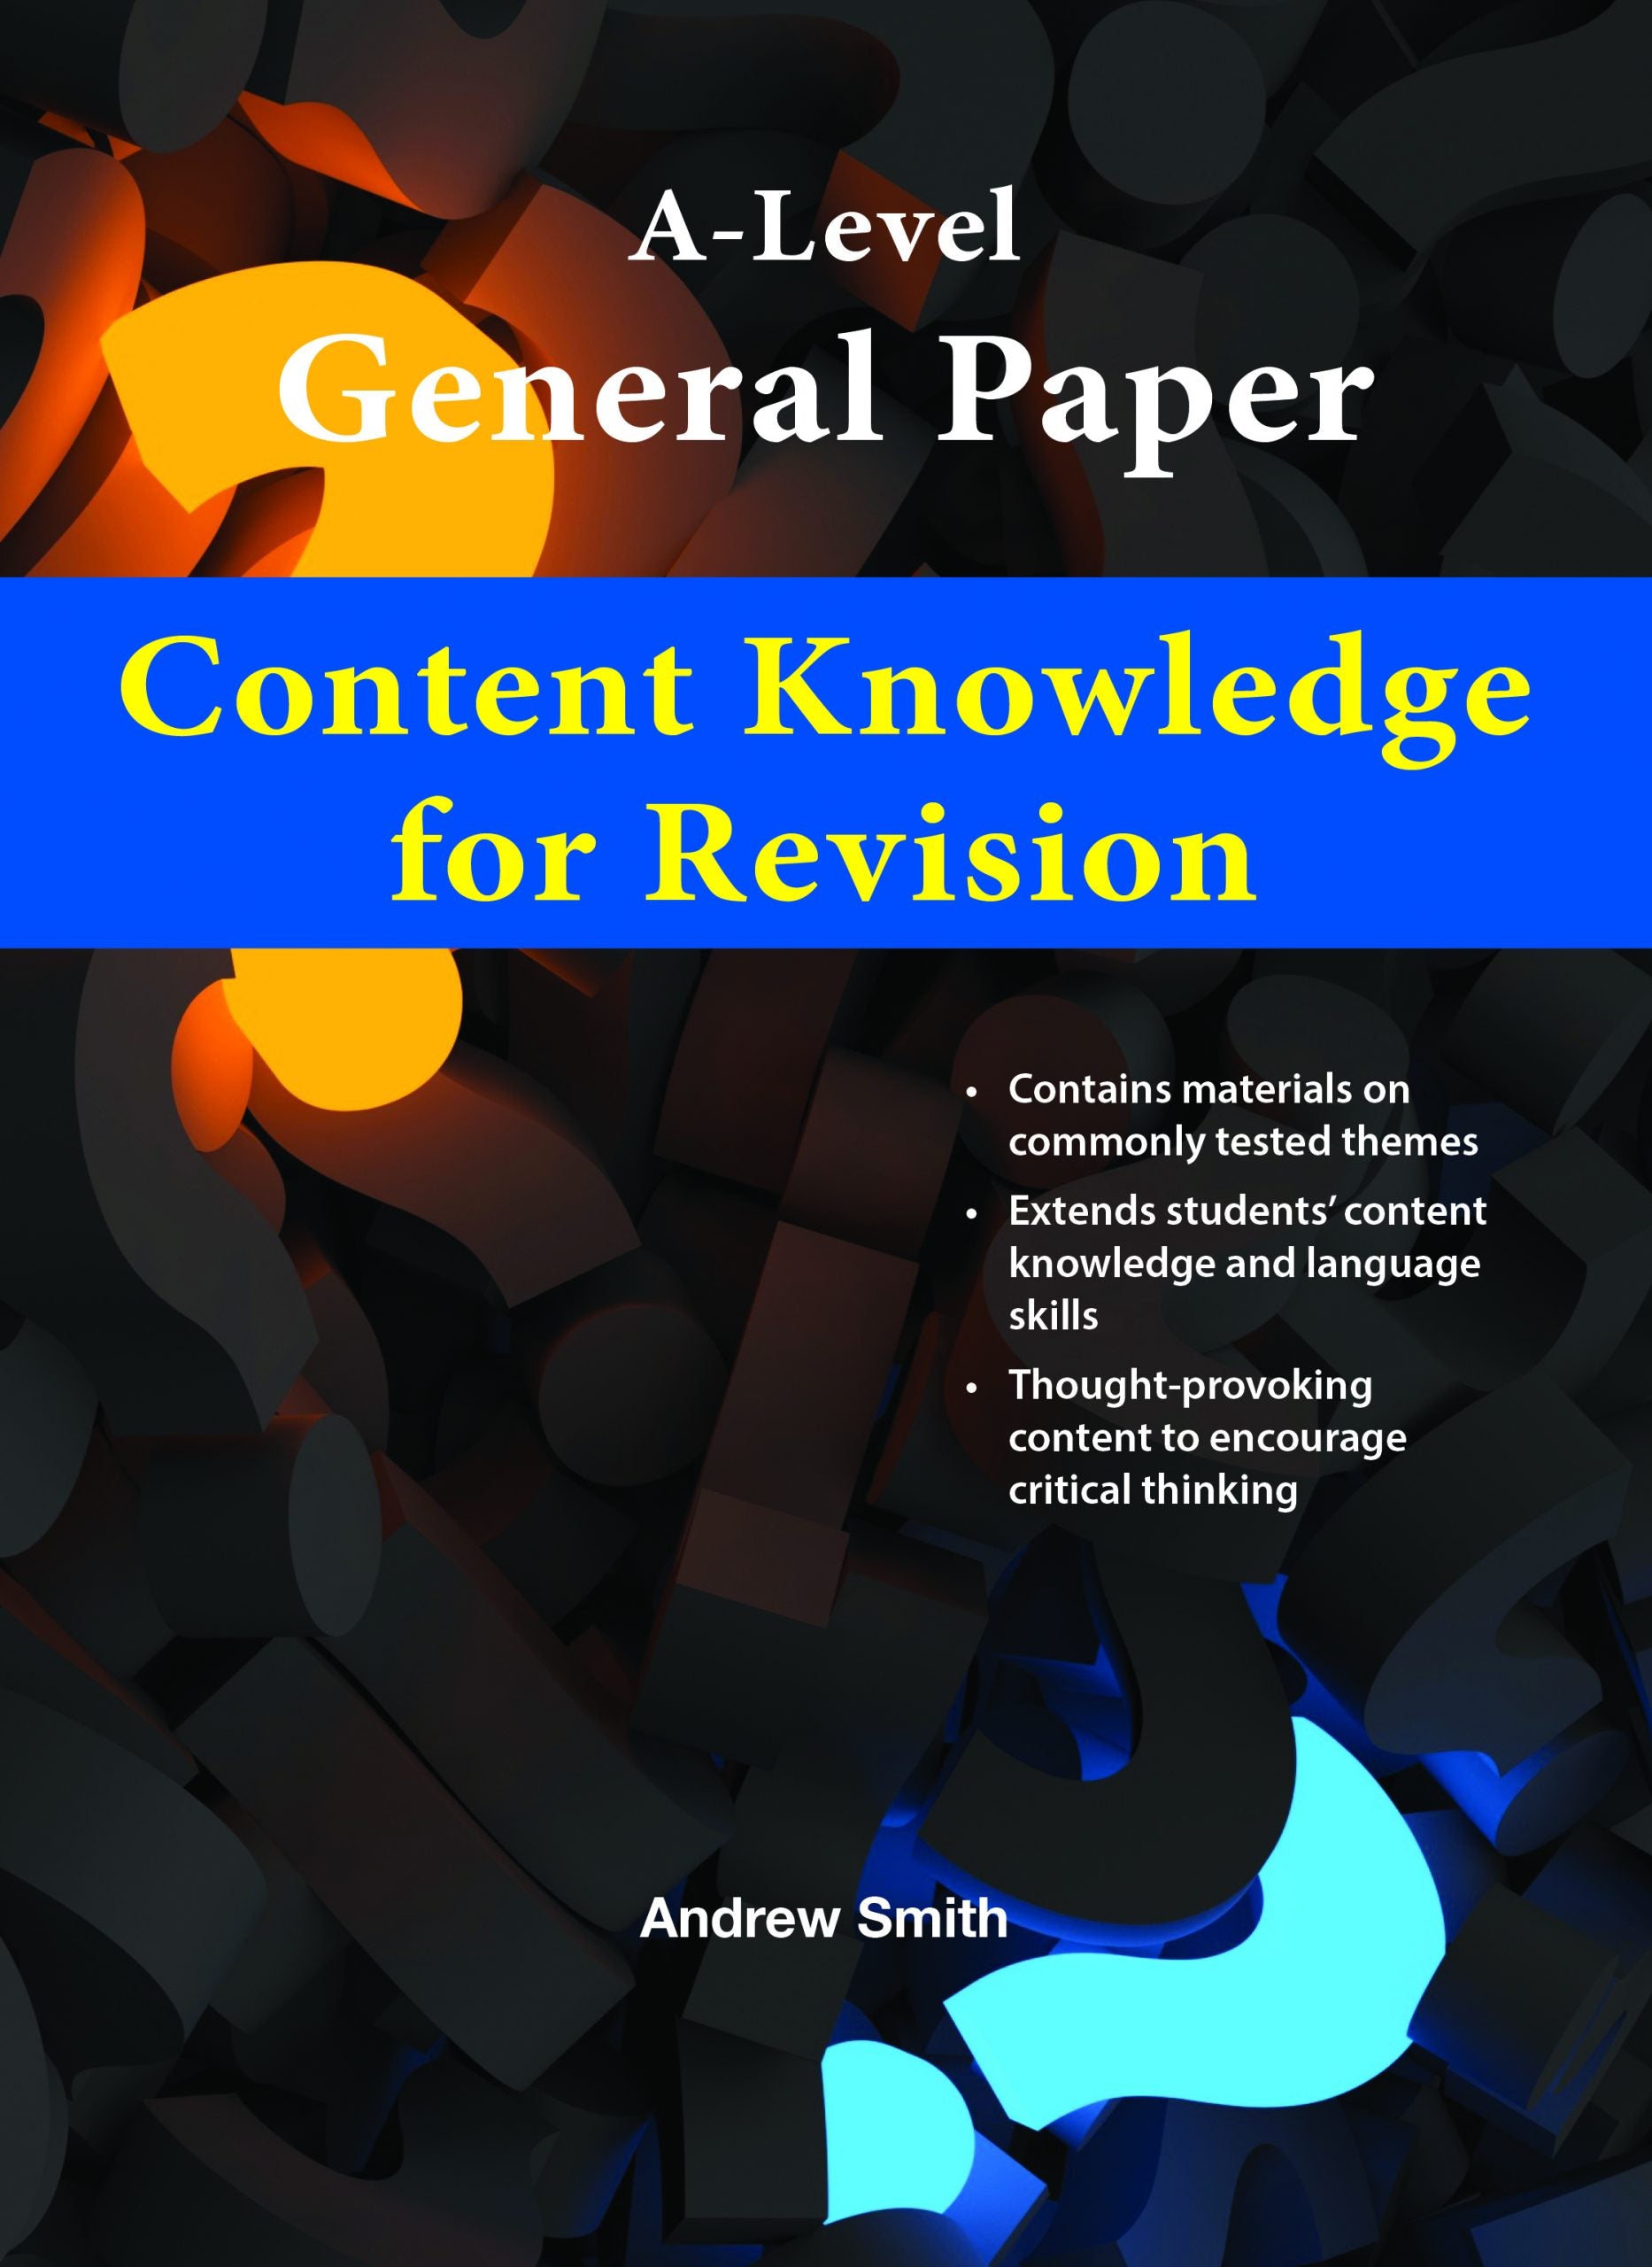 A-Level General Paper Content Knowledge for Revision